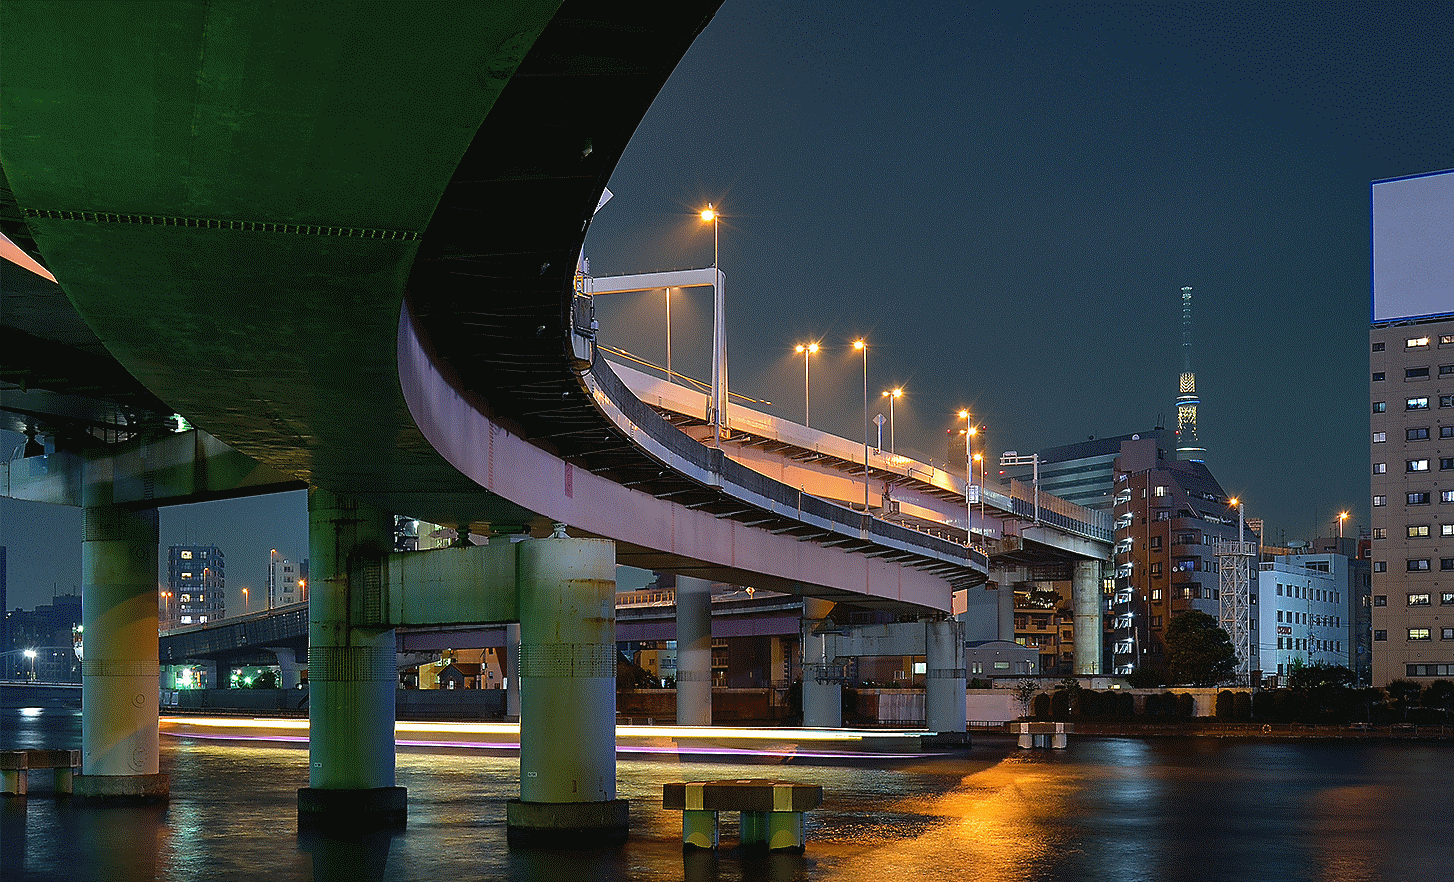 Low-light image of an elevated highway in an urban setting